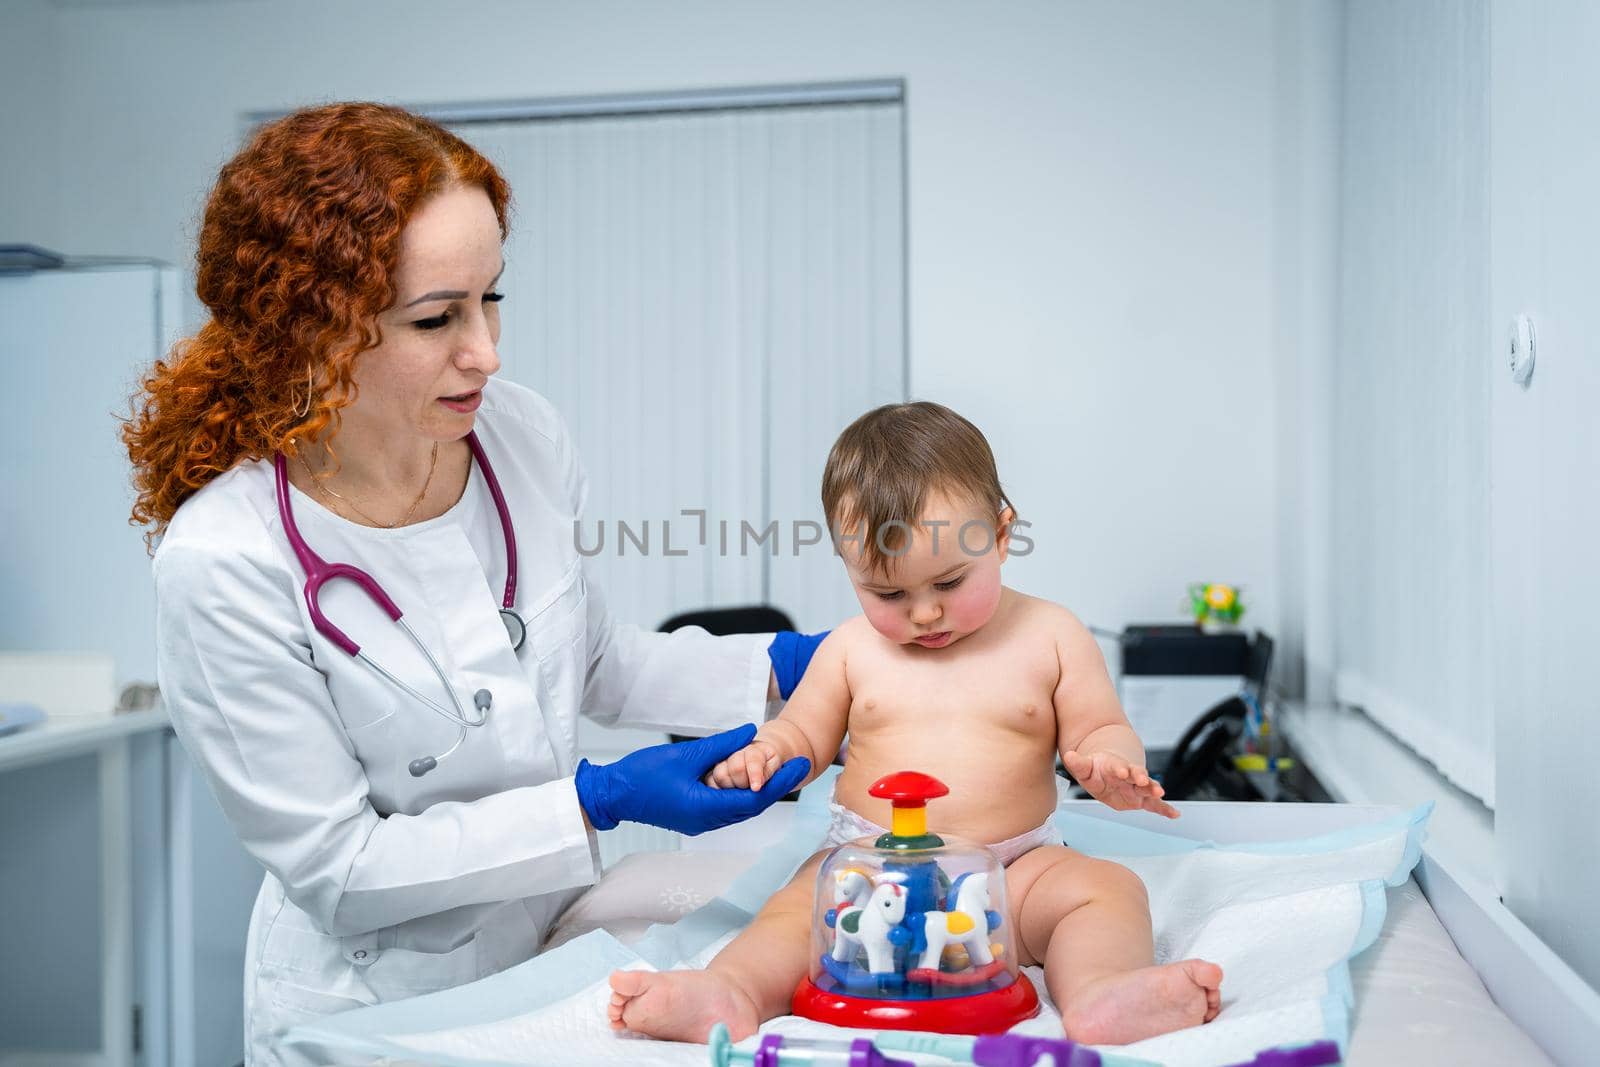 Pediatrician doctor concept. Children medical care. One year old baby girl examined by female pediatrician in clinic office. Child visiting doctor for health check-up. Doctor examine little patient.